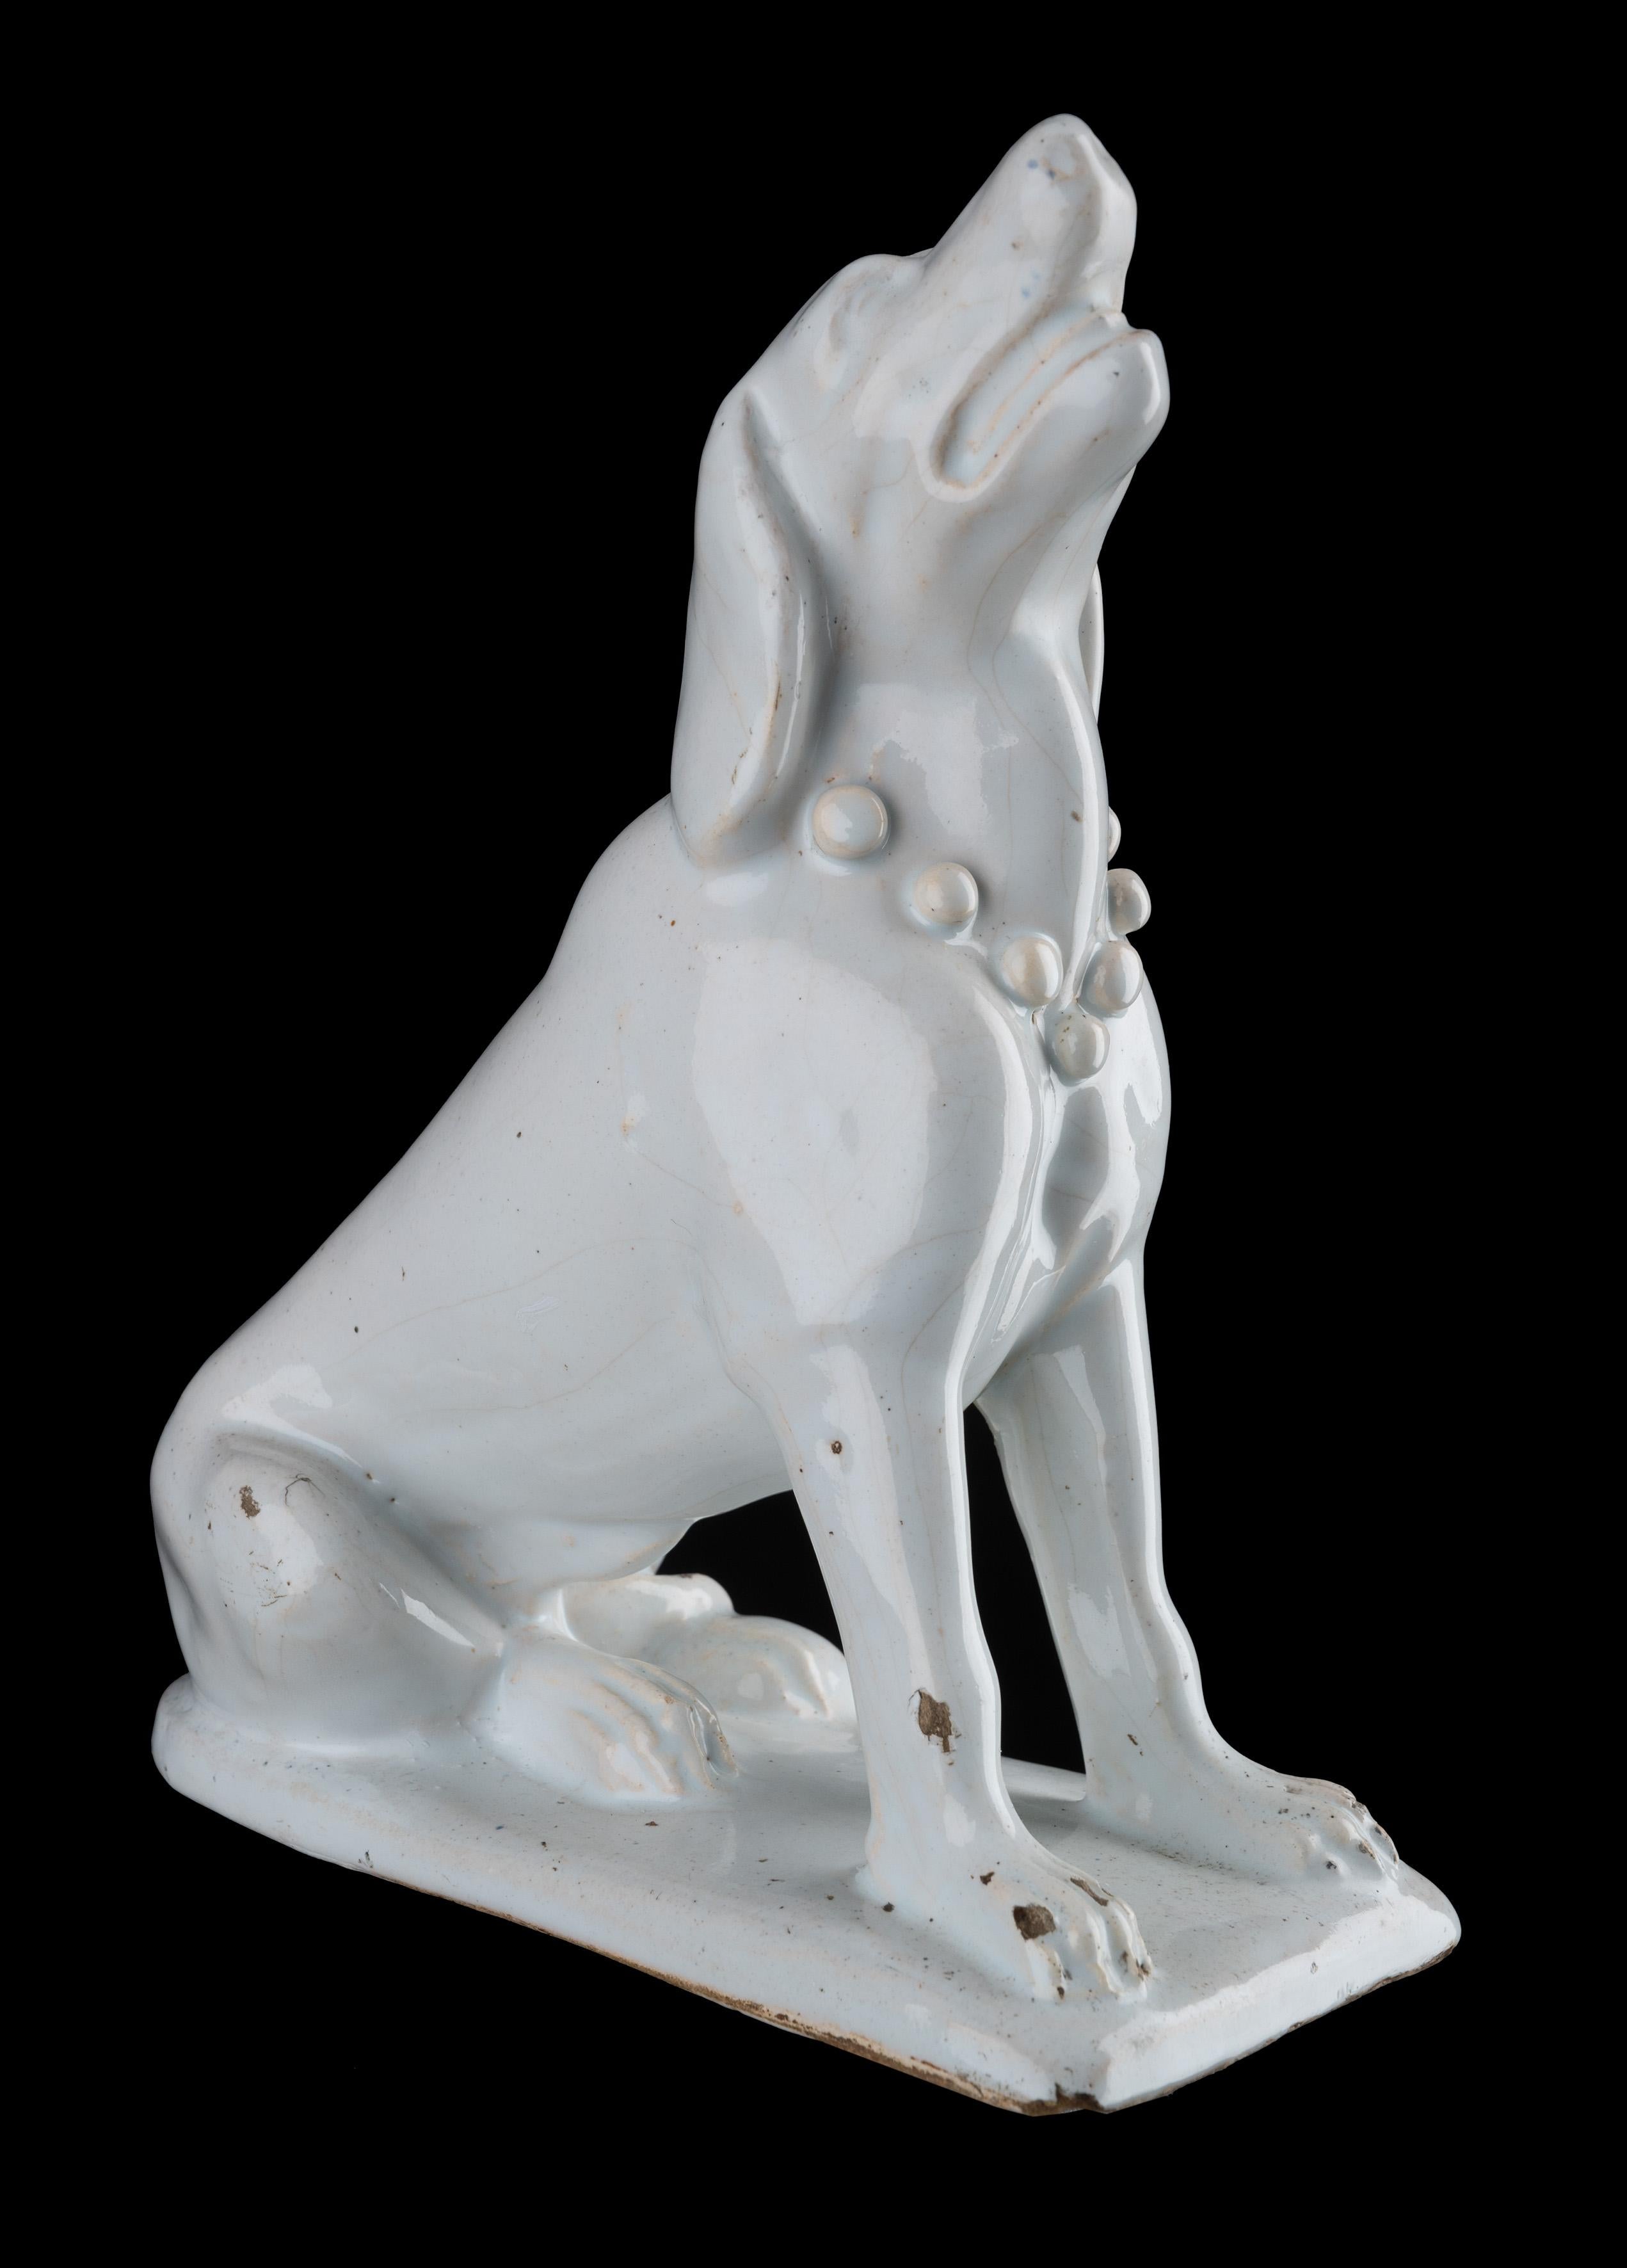 Dutch delftware A sitting dog. Delft, 1725-1775

The moulded dog is sitting on a rectangular plinth with rounded back and has its head raised and its snout opened. Around its neck is a collar with bulbs/spheres. The white-glazed dog is unpainted.